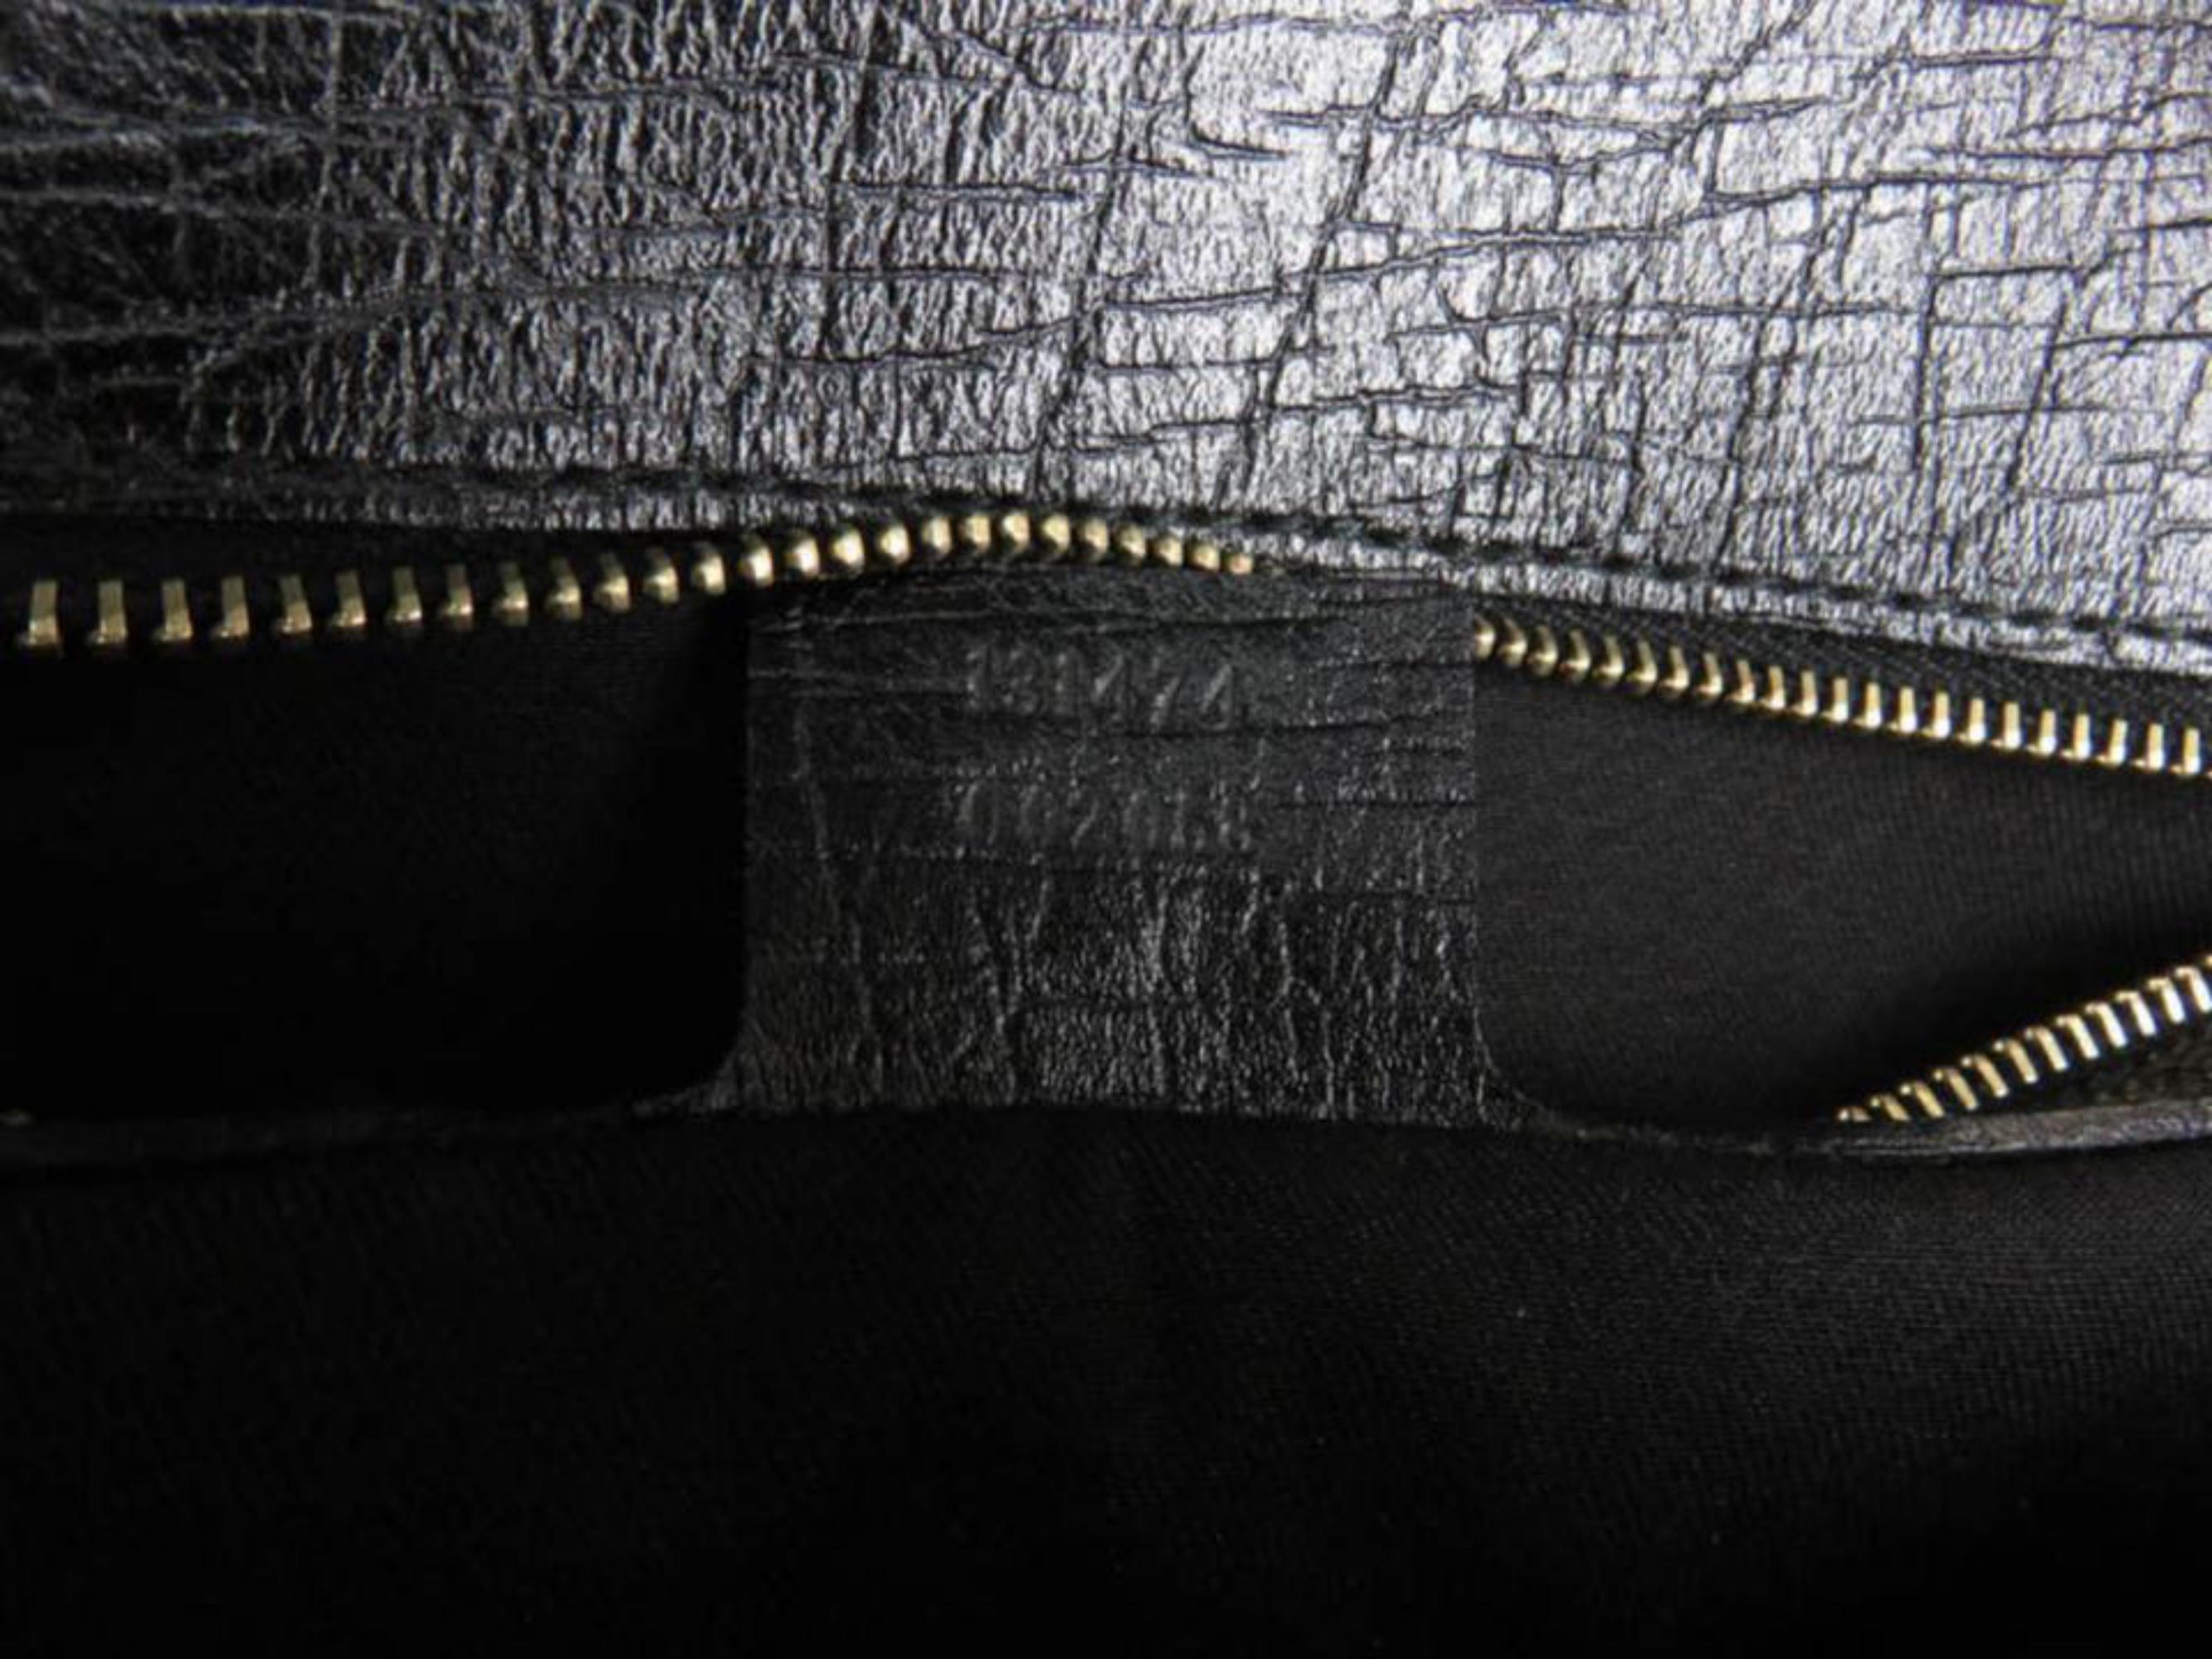 Gucci Horsebit Sherry Web Chain Flap 867901 Black Canvas Shoulder Bag In Excellent Condition For Sale In Forest Hills, NY